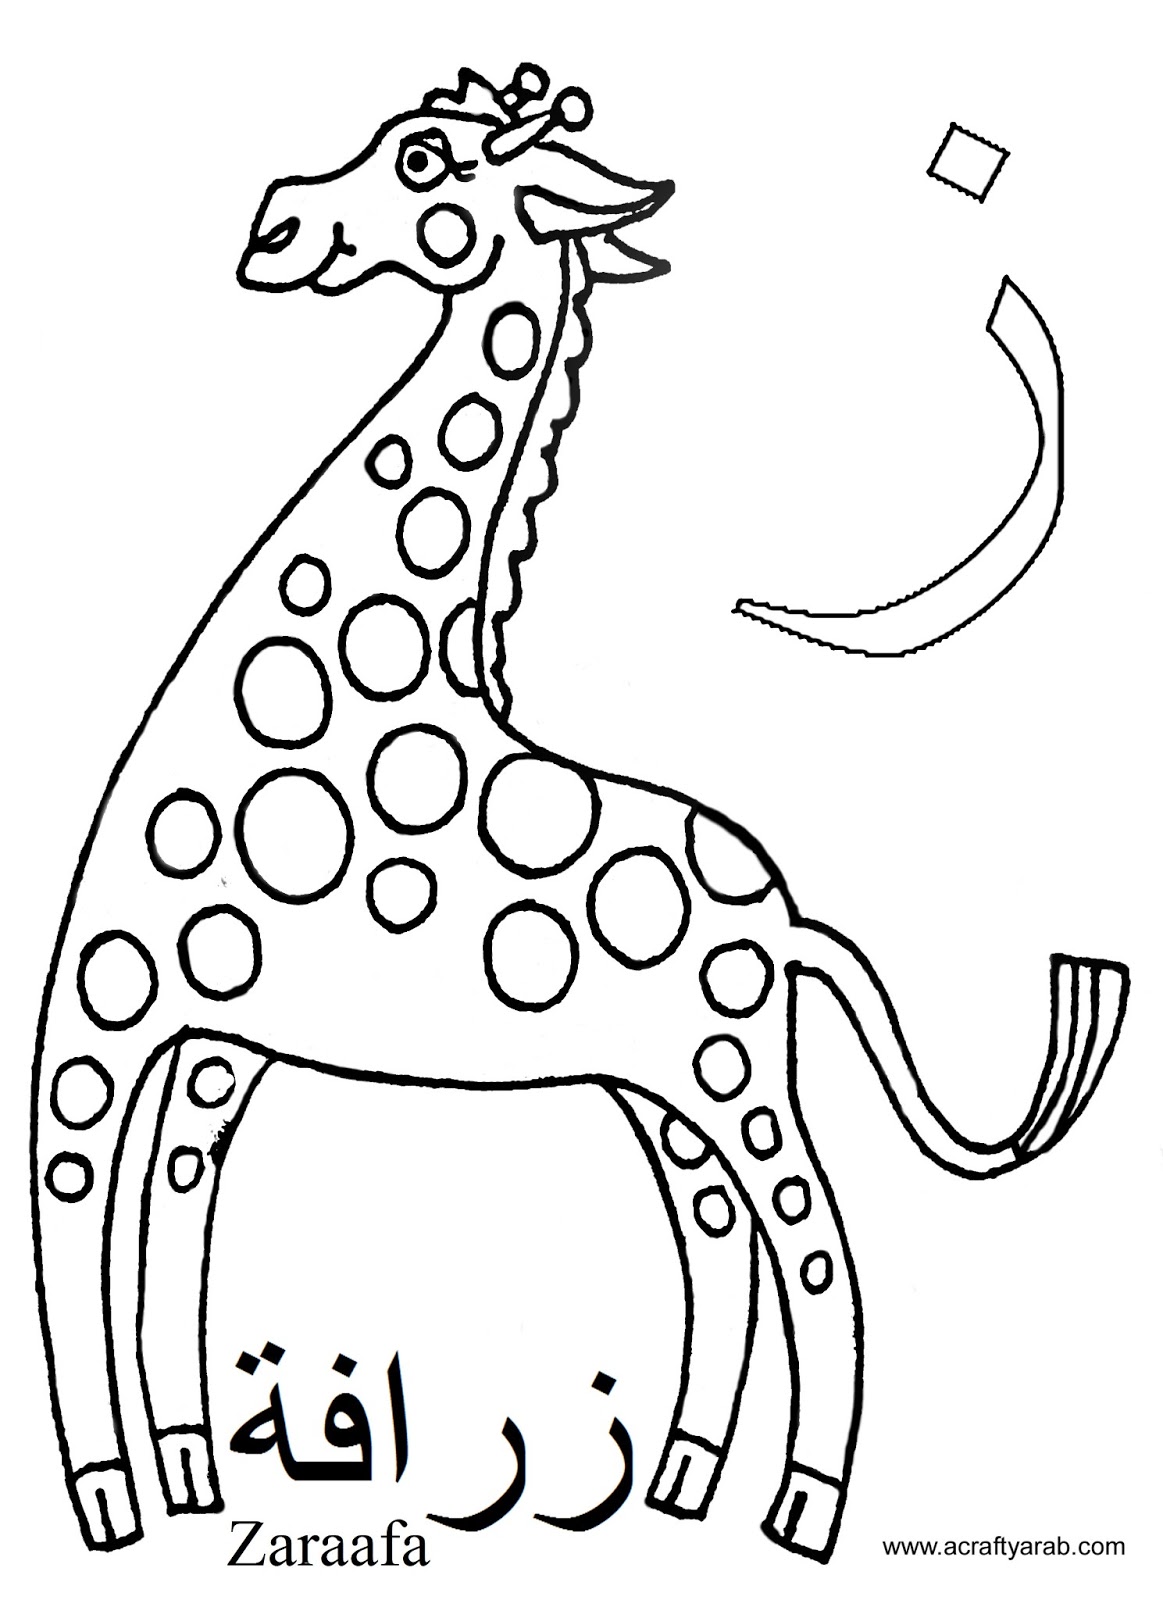 Arabic Alphabet Coloring Pages at GetColorings.com | Free printable